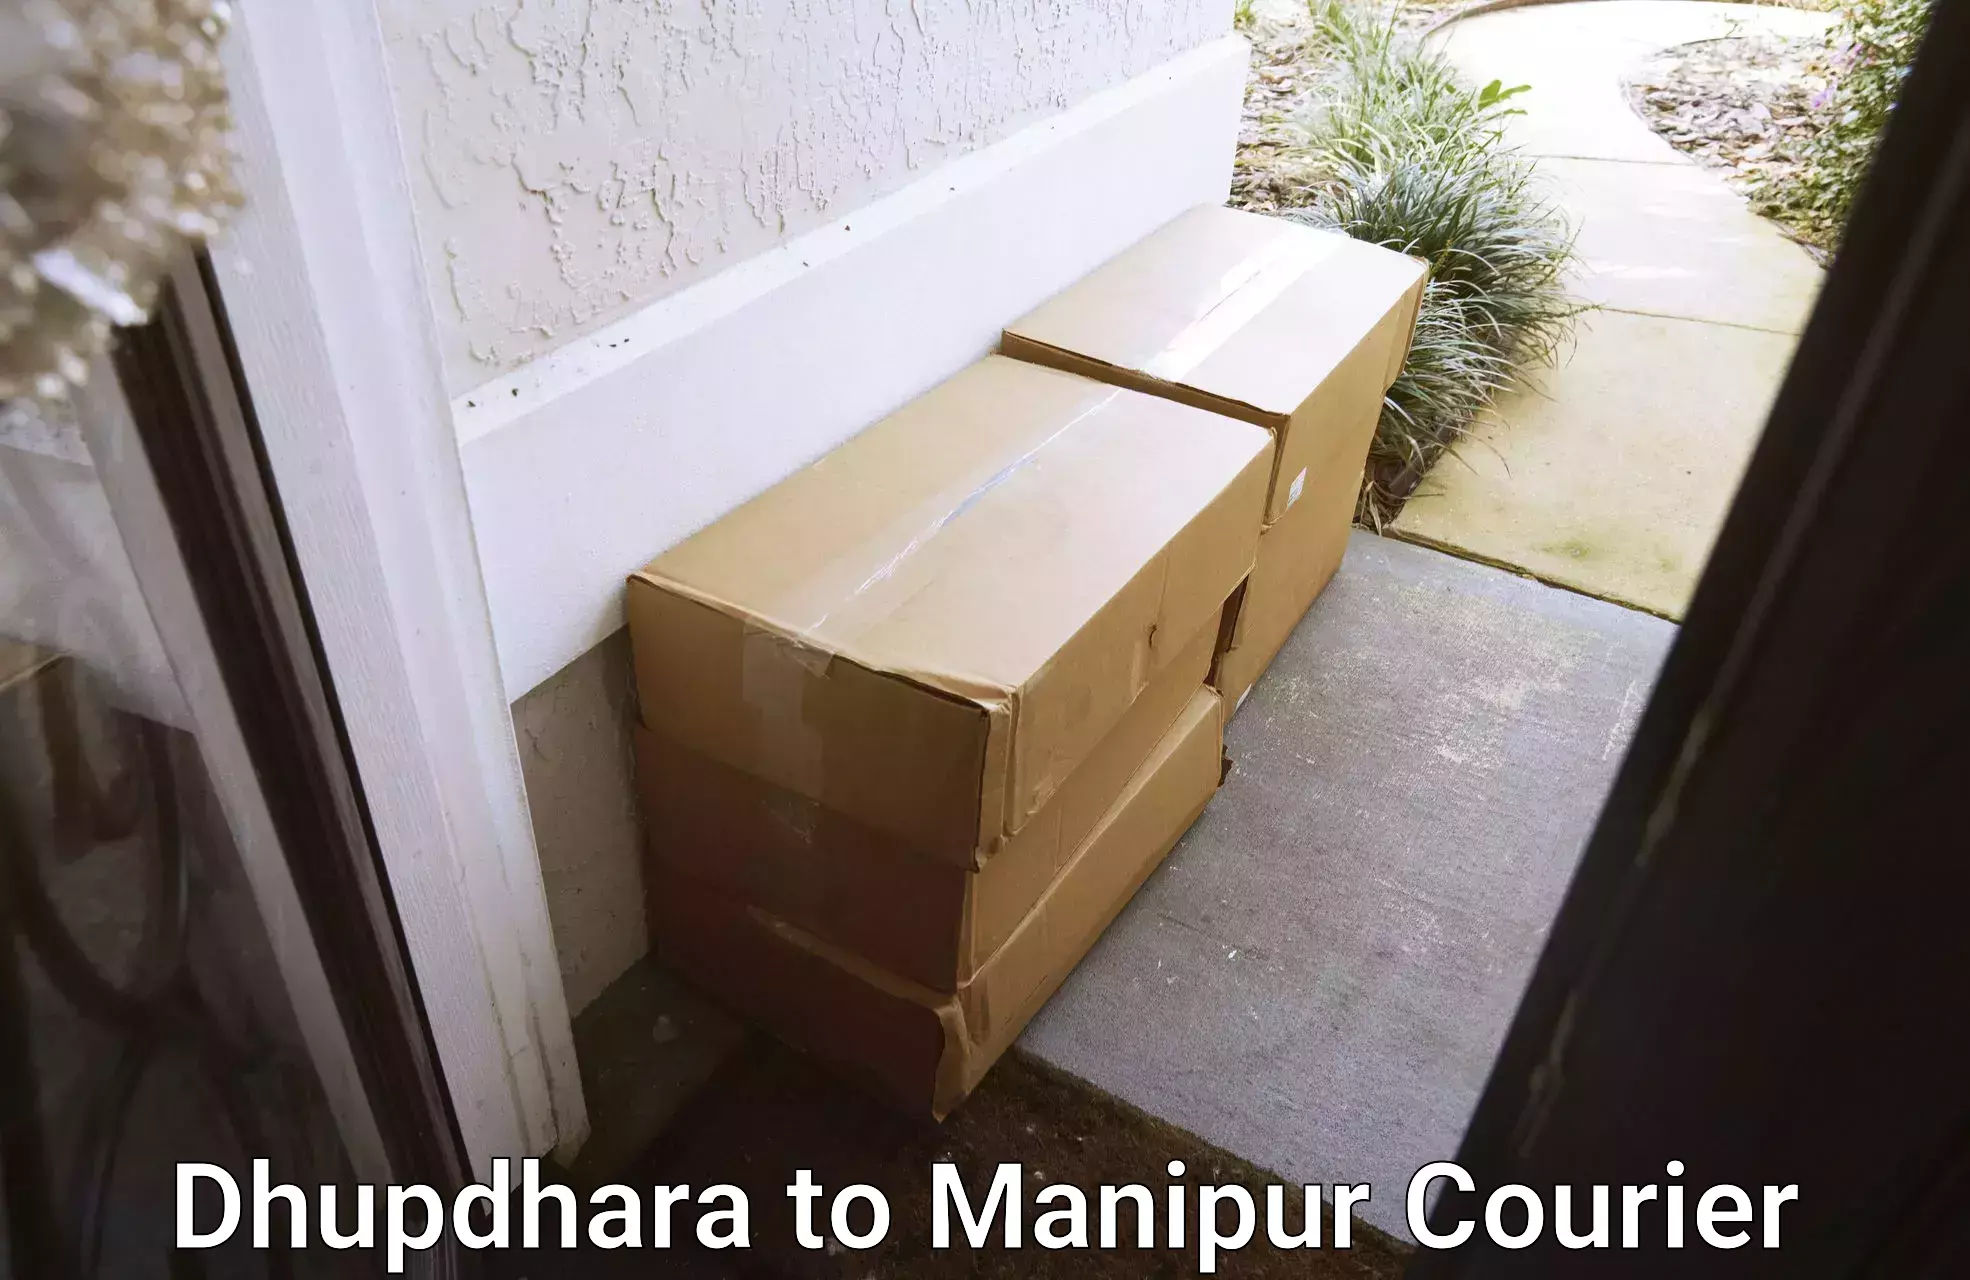 Custom courier packaging Dhupdhara to Imphal